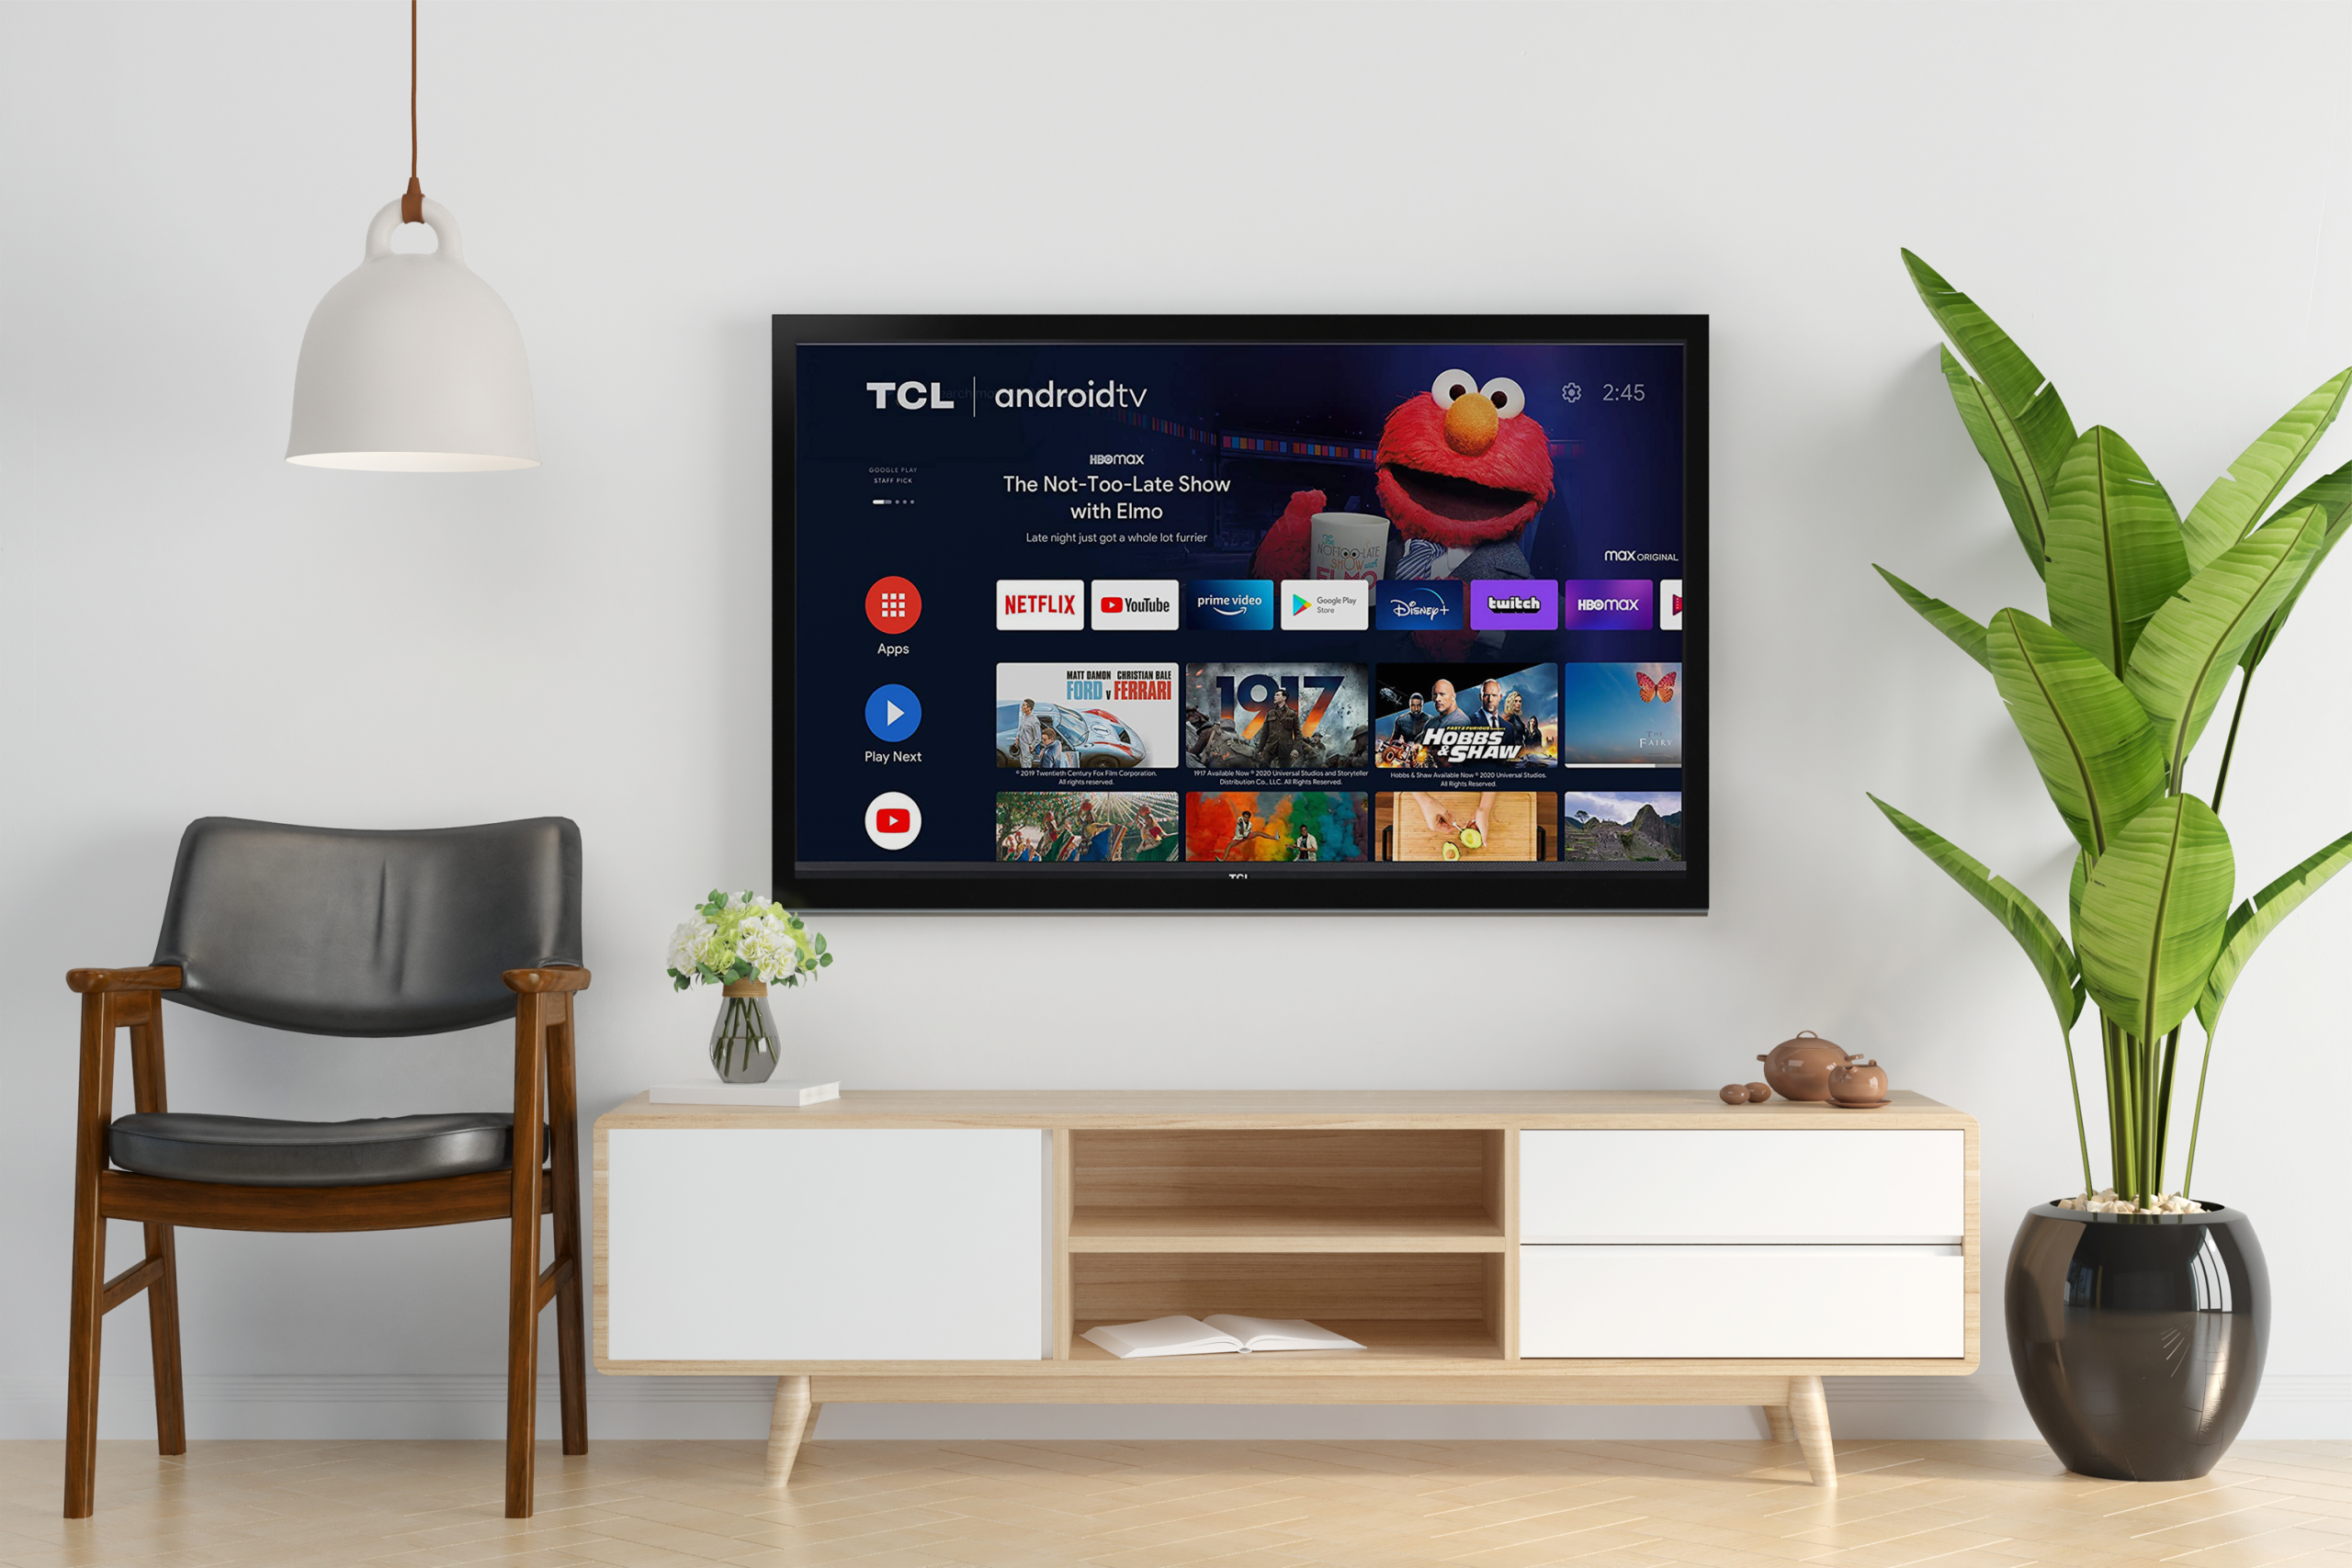 Why Should You Buy A TLC TV?